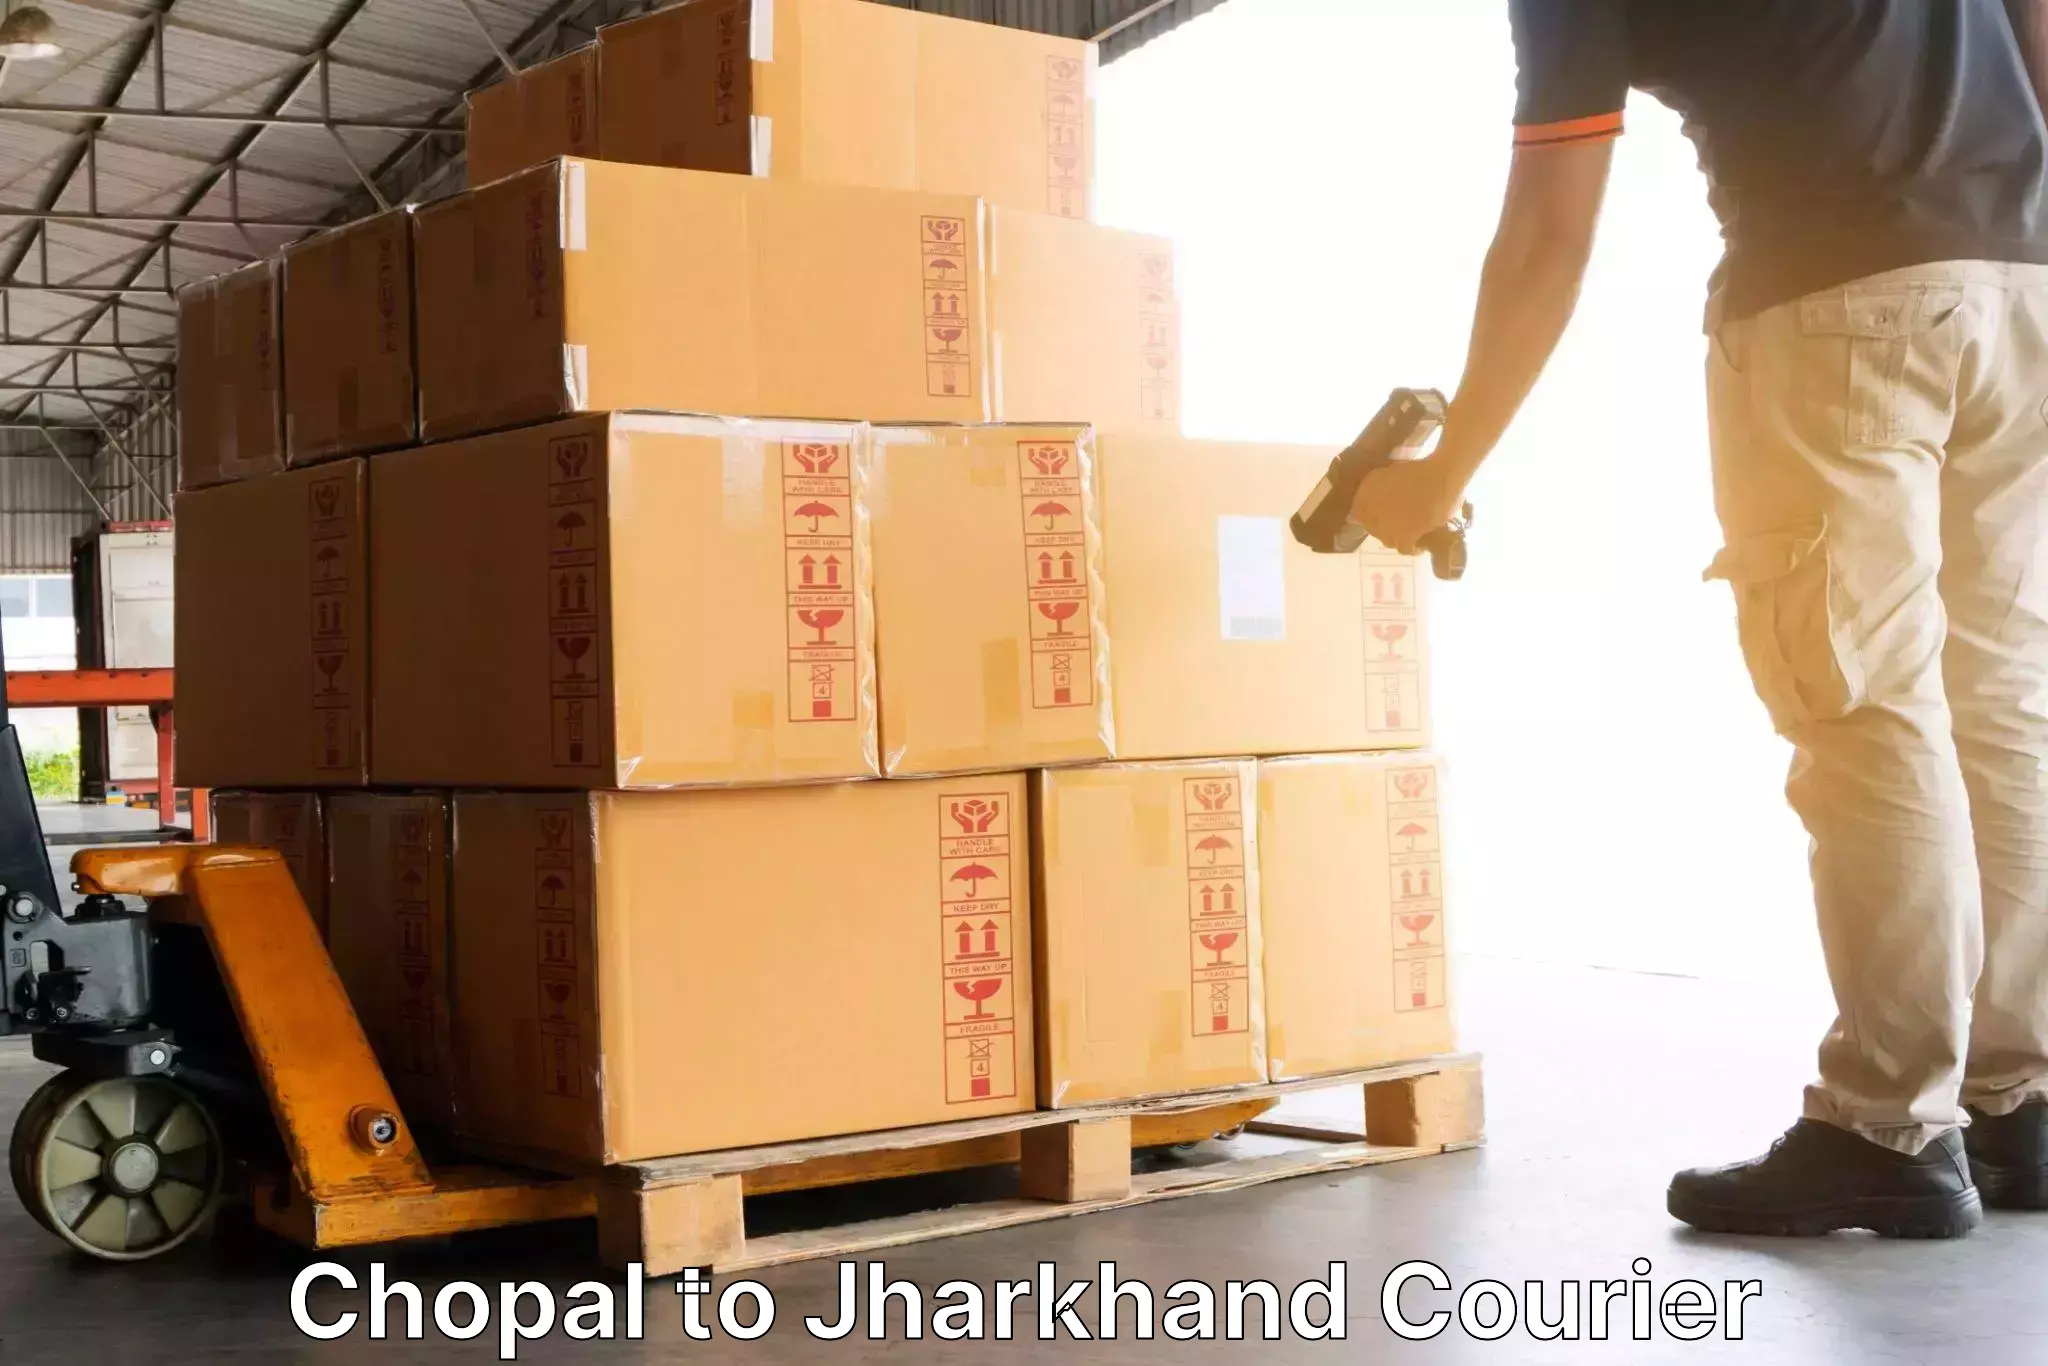 Online package tracking Chopal to Jharkhand